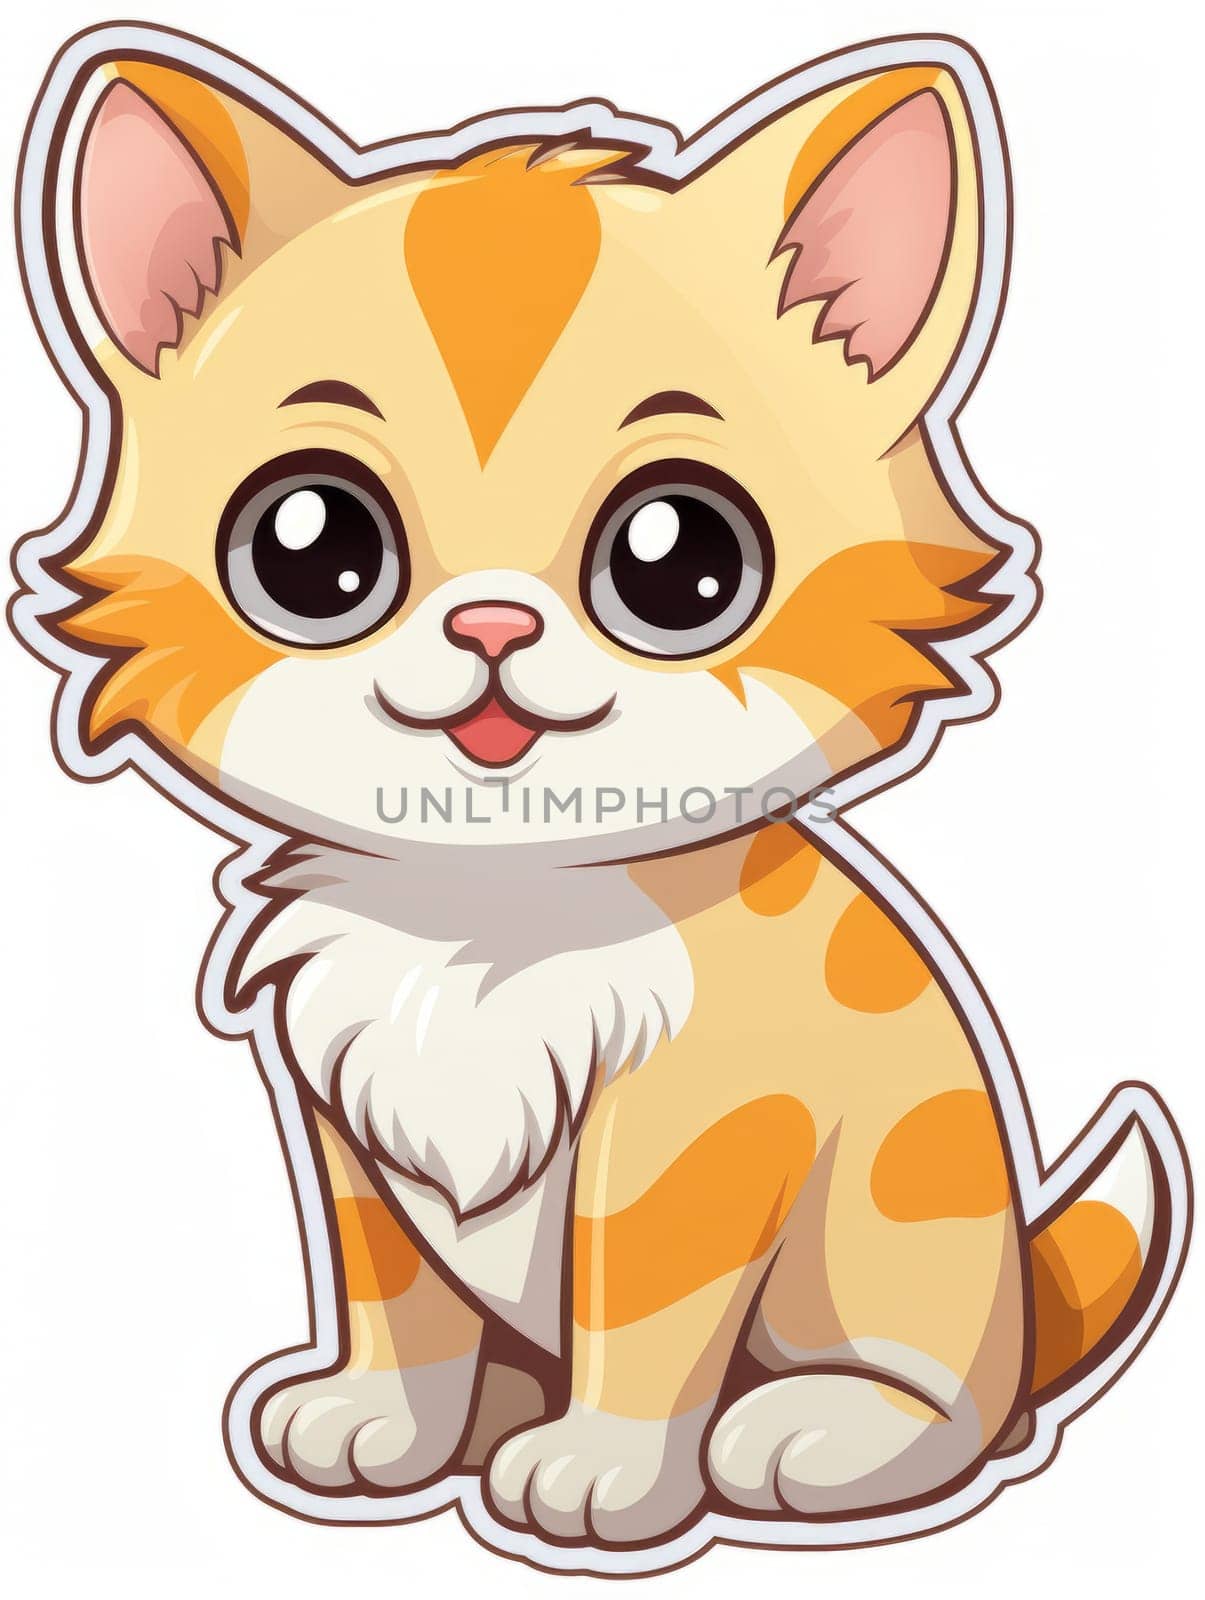 Funny Kitten sticker in cartoon style on white background isolated, AI by but_photo